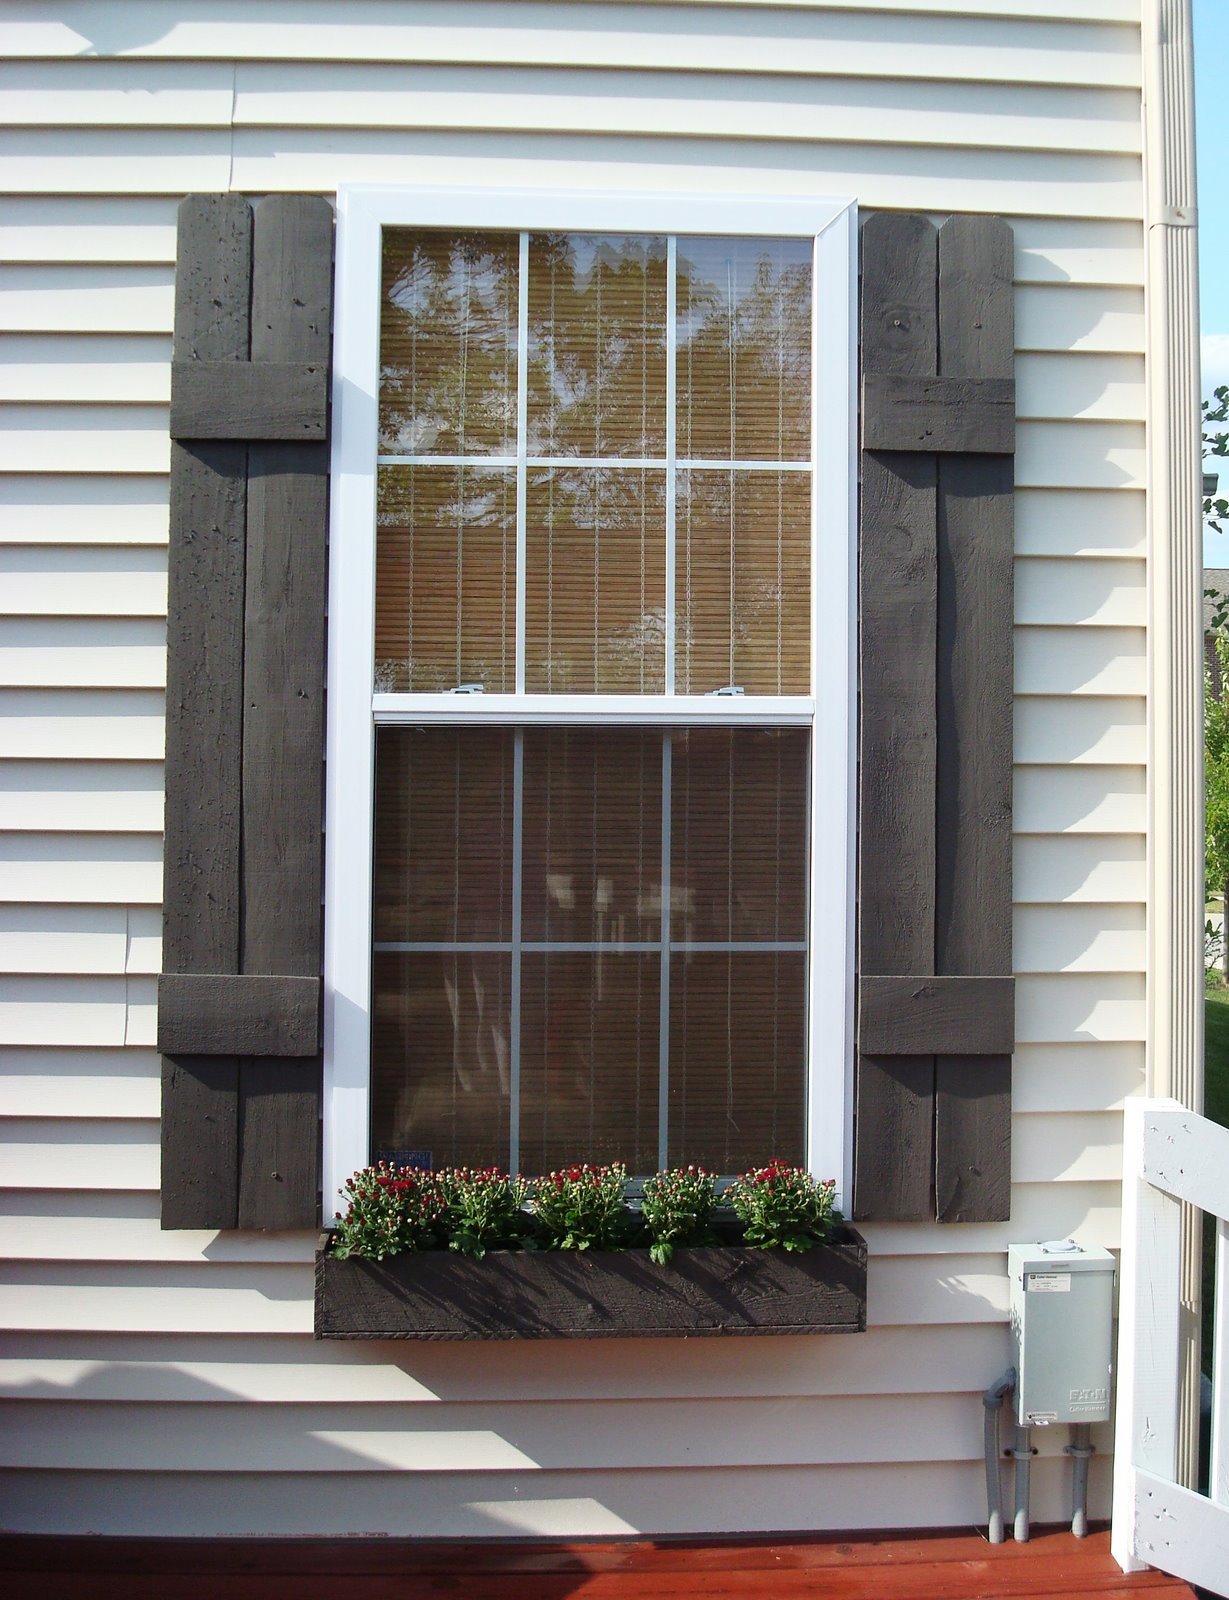 Teak Material Window Minimalist Teak Material For Exterior Window Shutters Beside Classic Window On White Wall Exterior Exterior Window Shutters With Maximum Functional Features